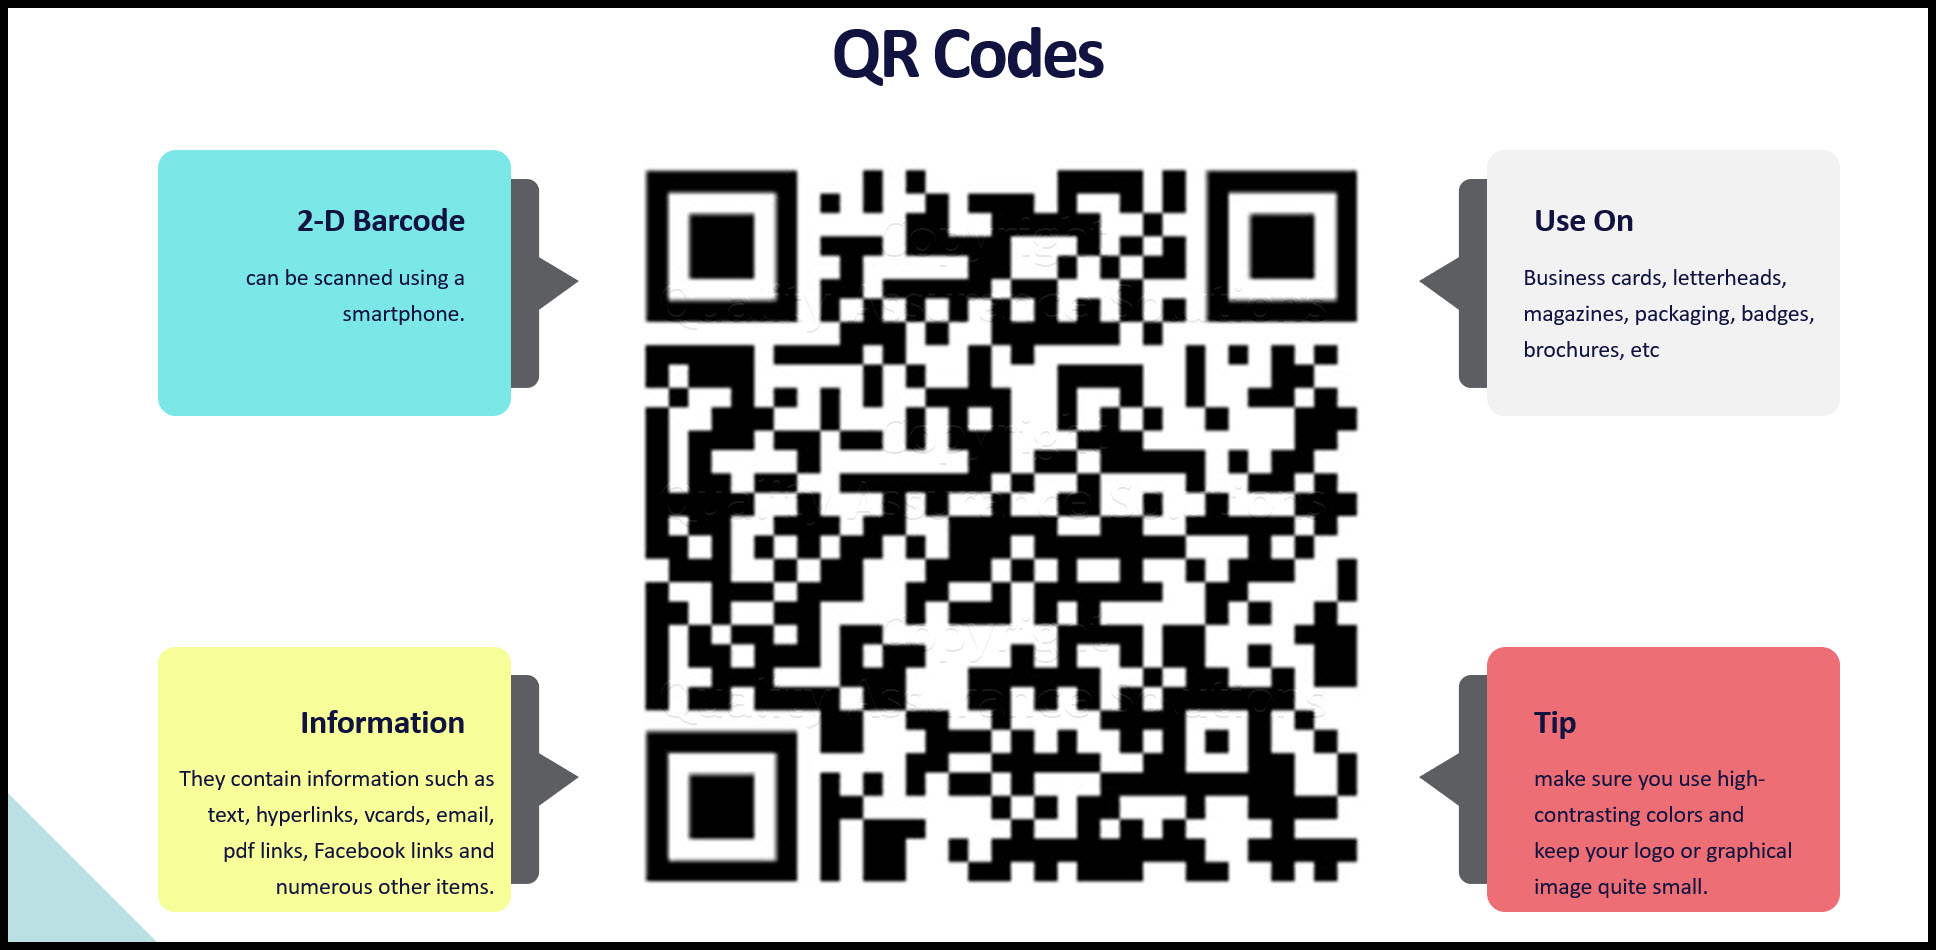 Explore the QR code definition, Learn how to use QR codes and how to drive your business with QR codes. 